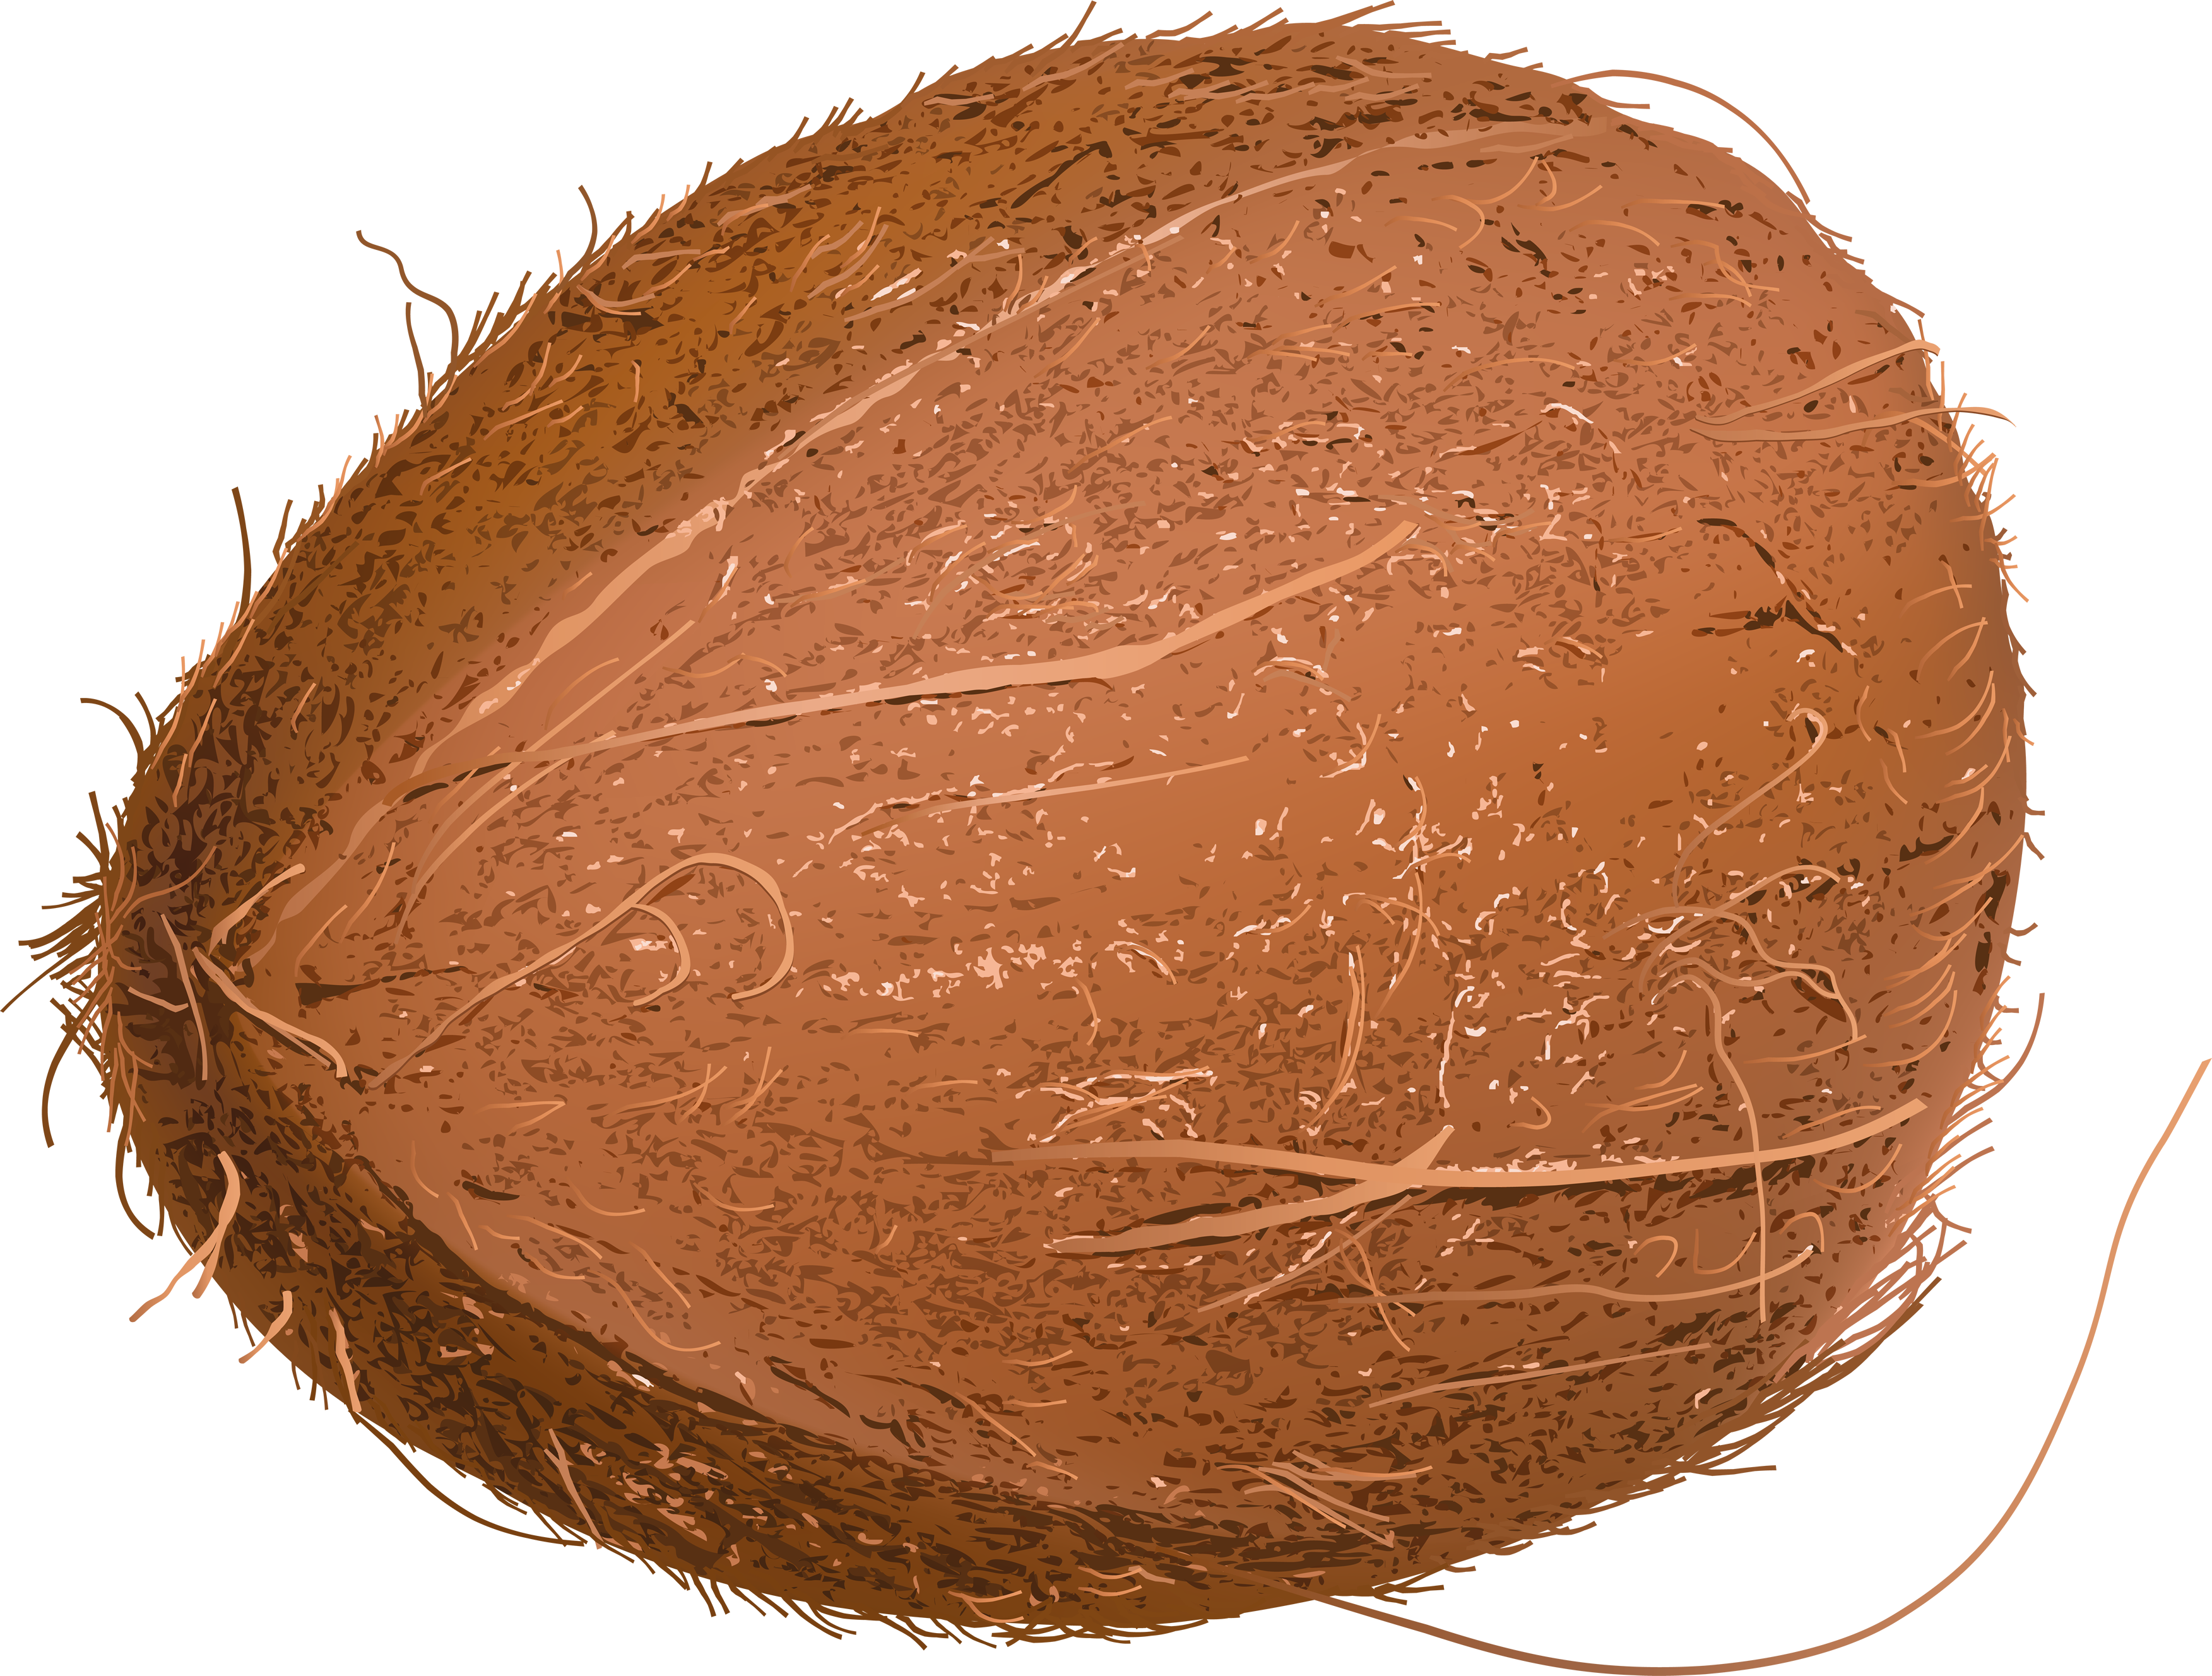 Coconut clipart diagram. Png images free download